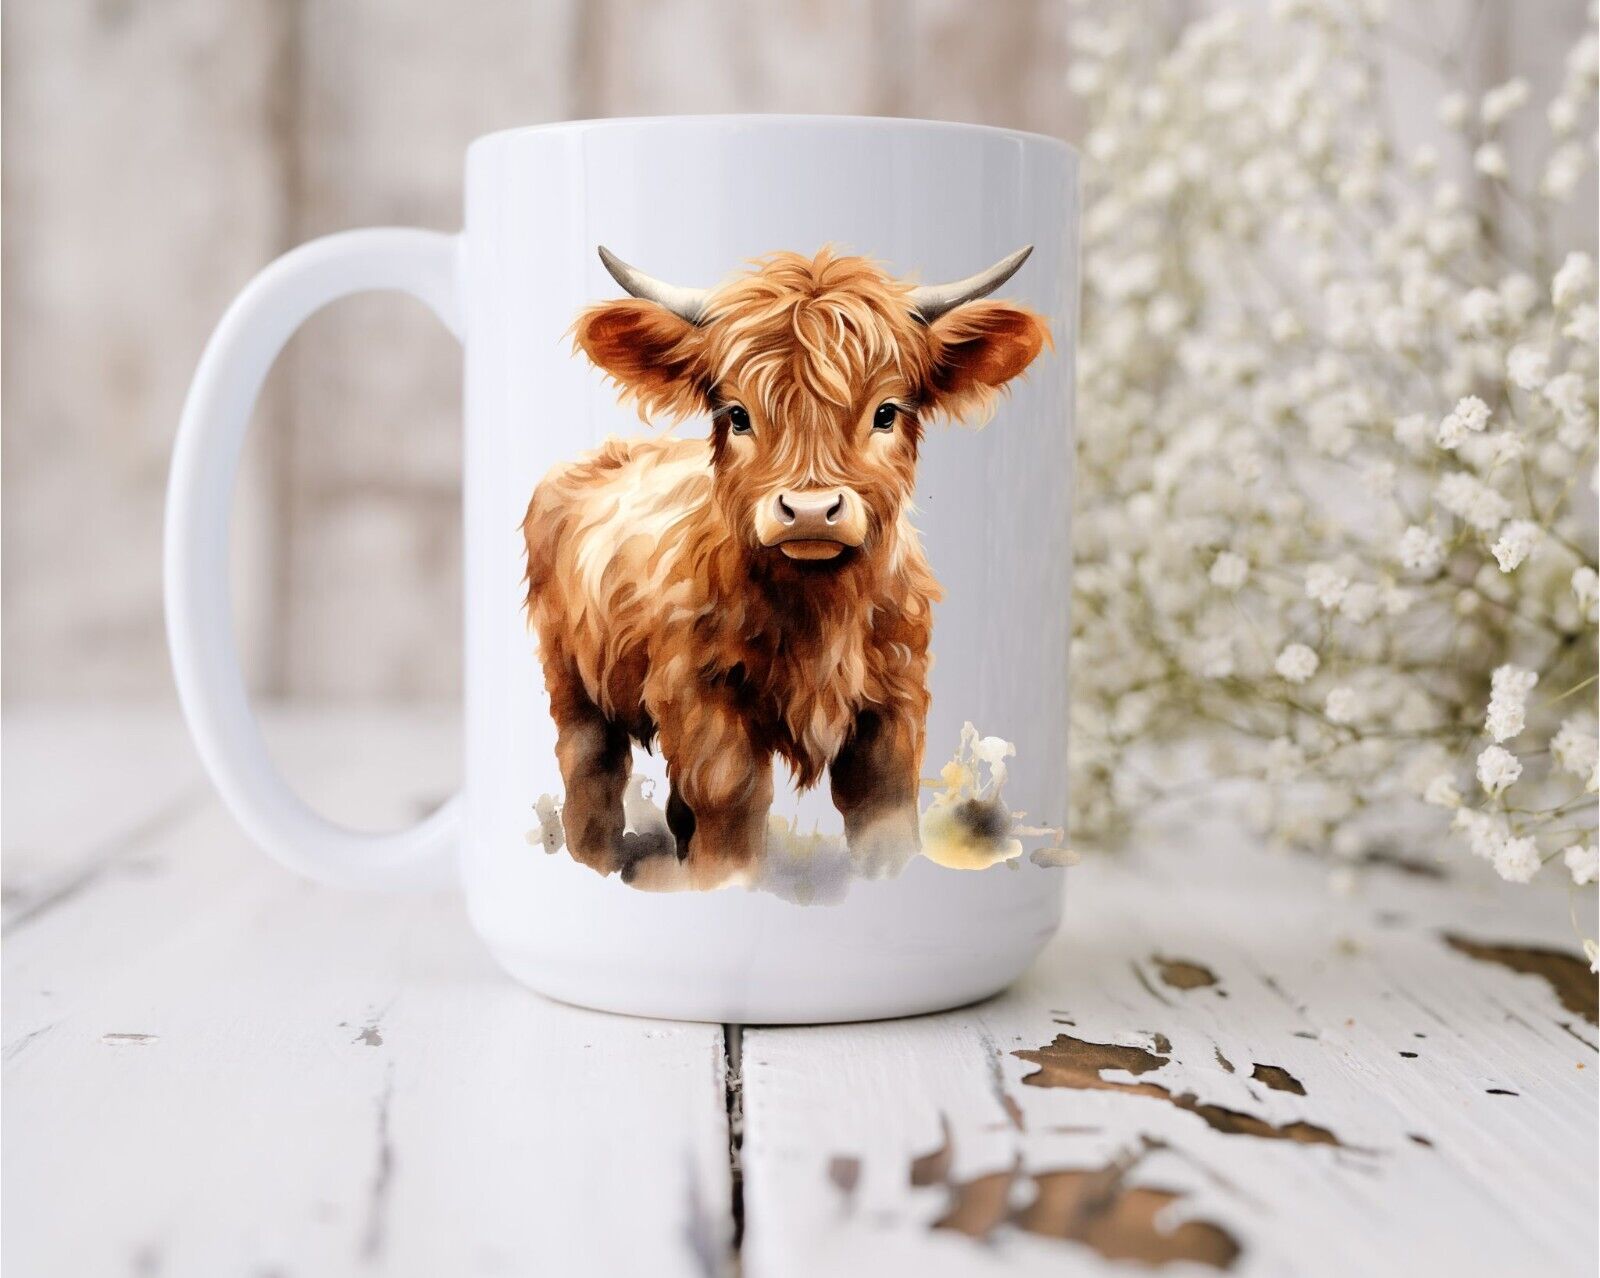 Highland cow coffee mug Fluffy Cow mug Cow Gifts for Cow lovers, Scottish Cow